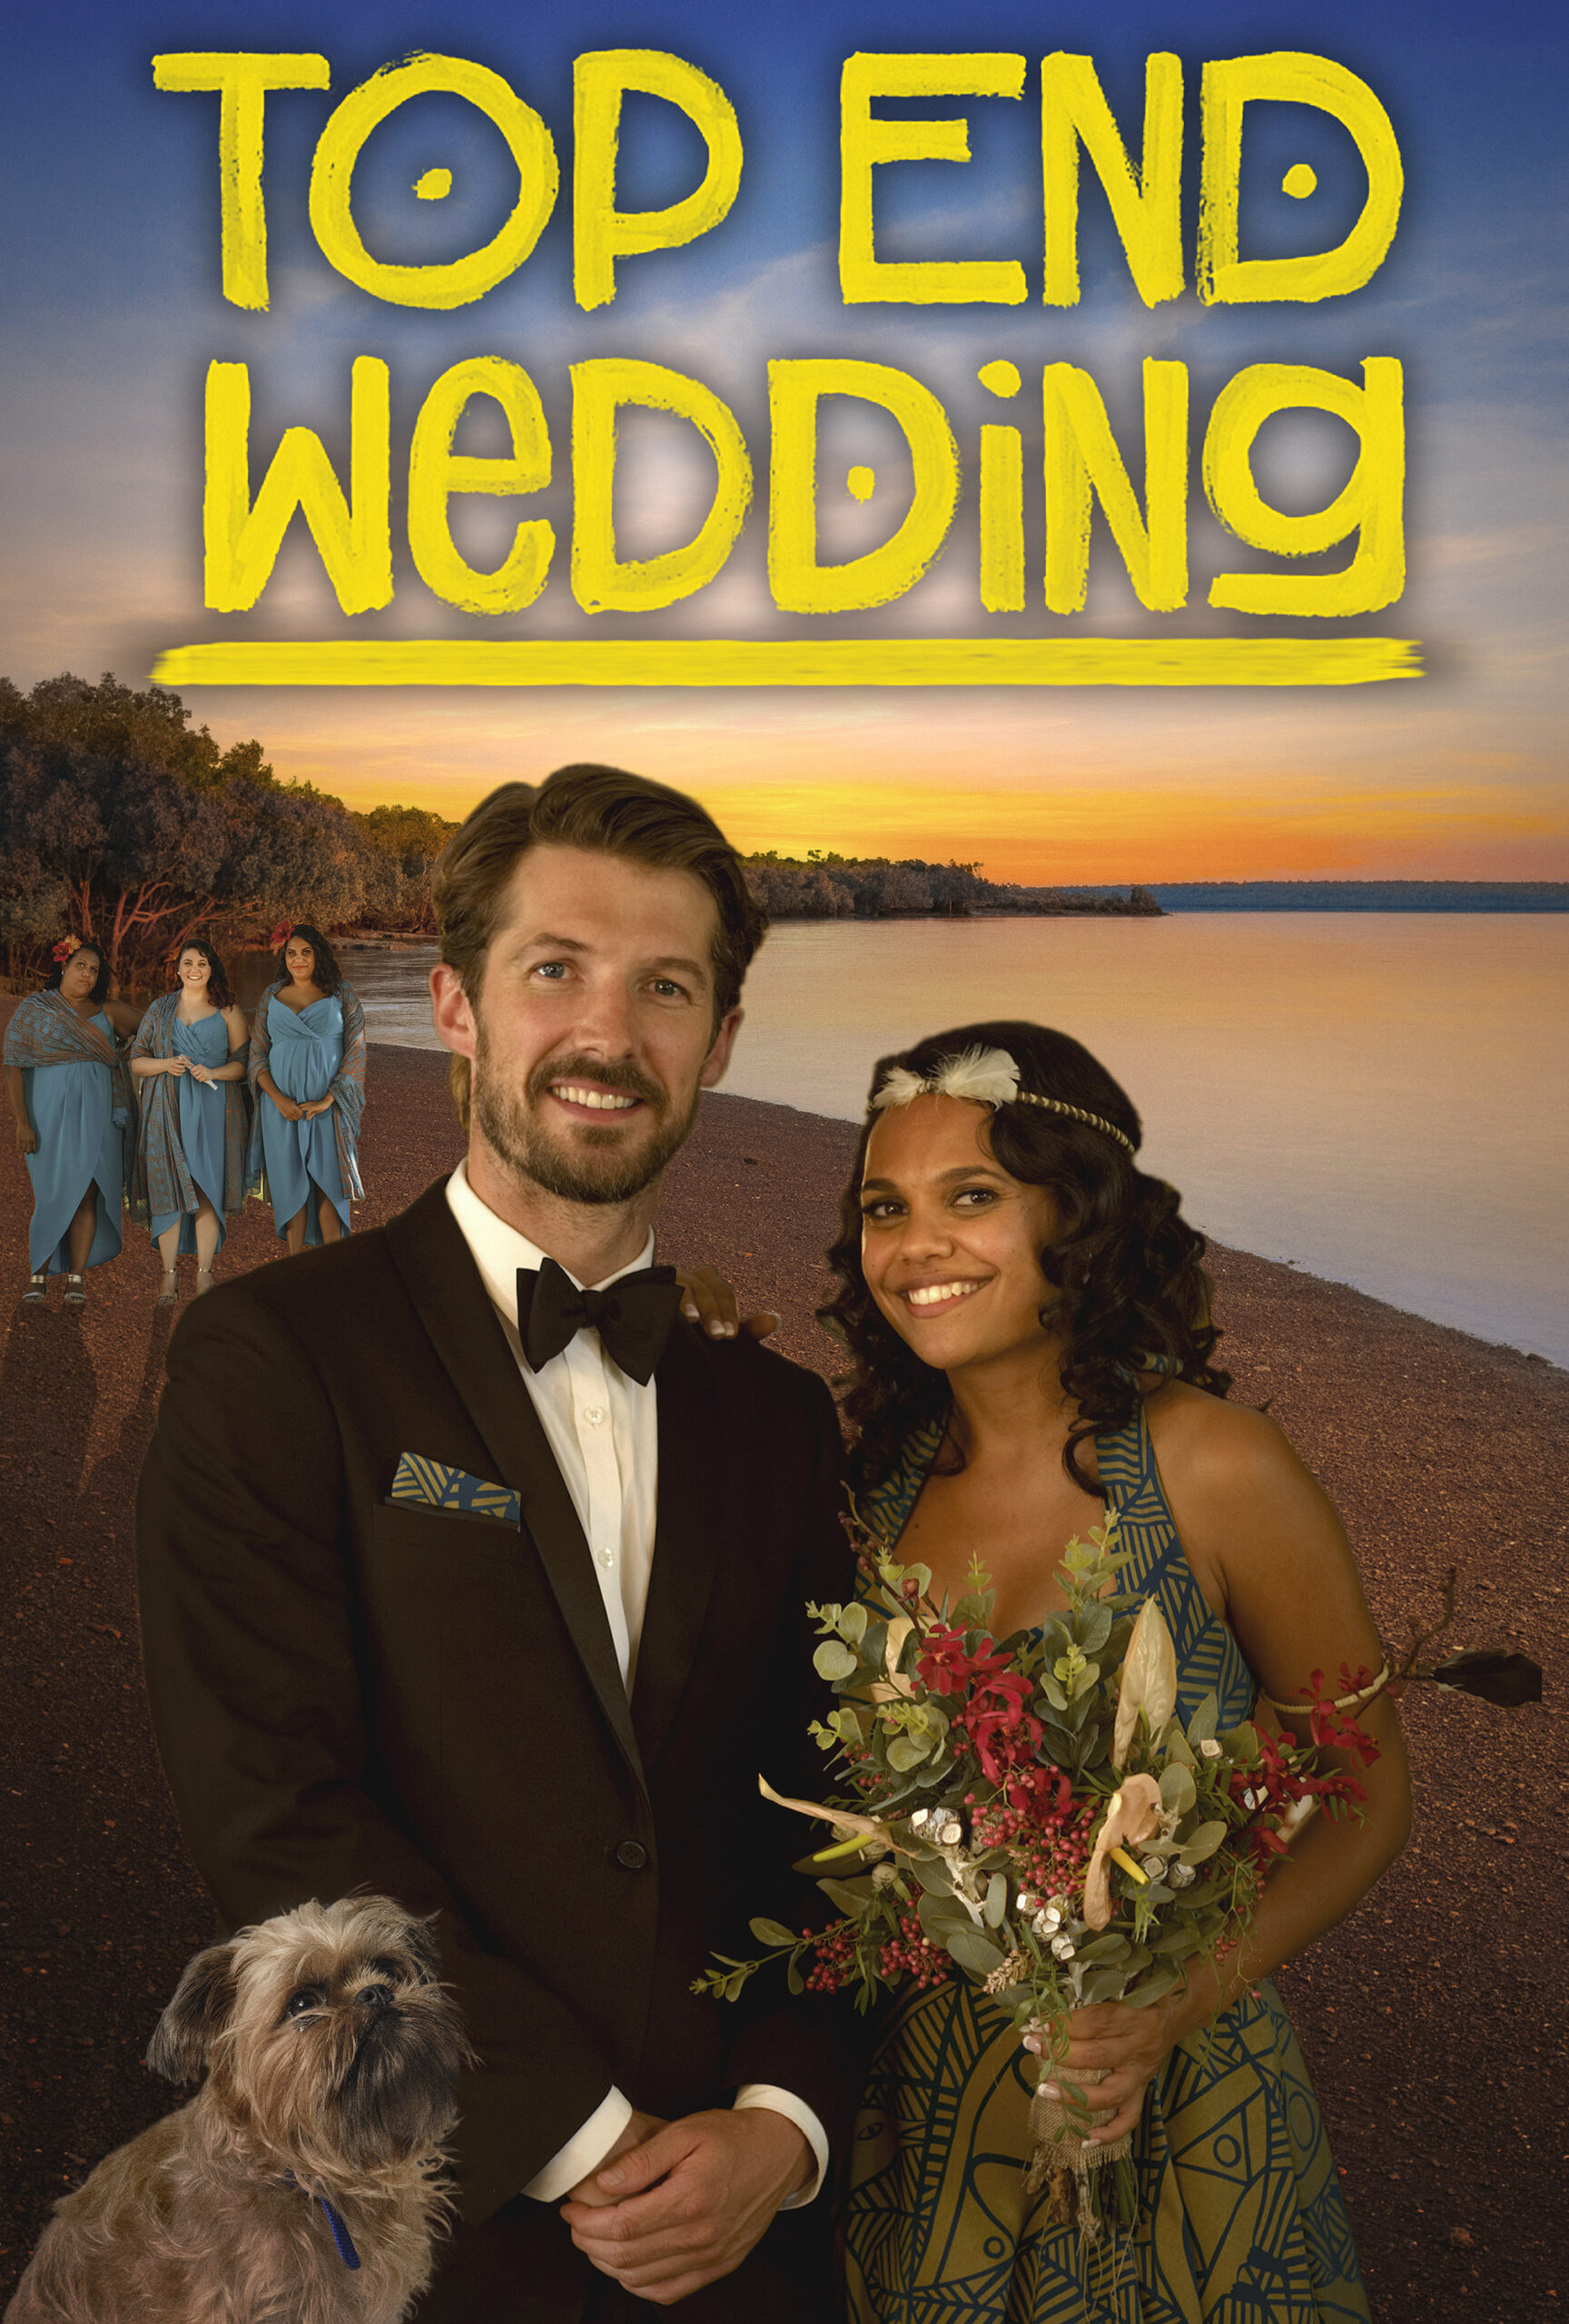 End Wedding” delivers laughter, tears, and life's true riches – Reel Honest Reviews